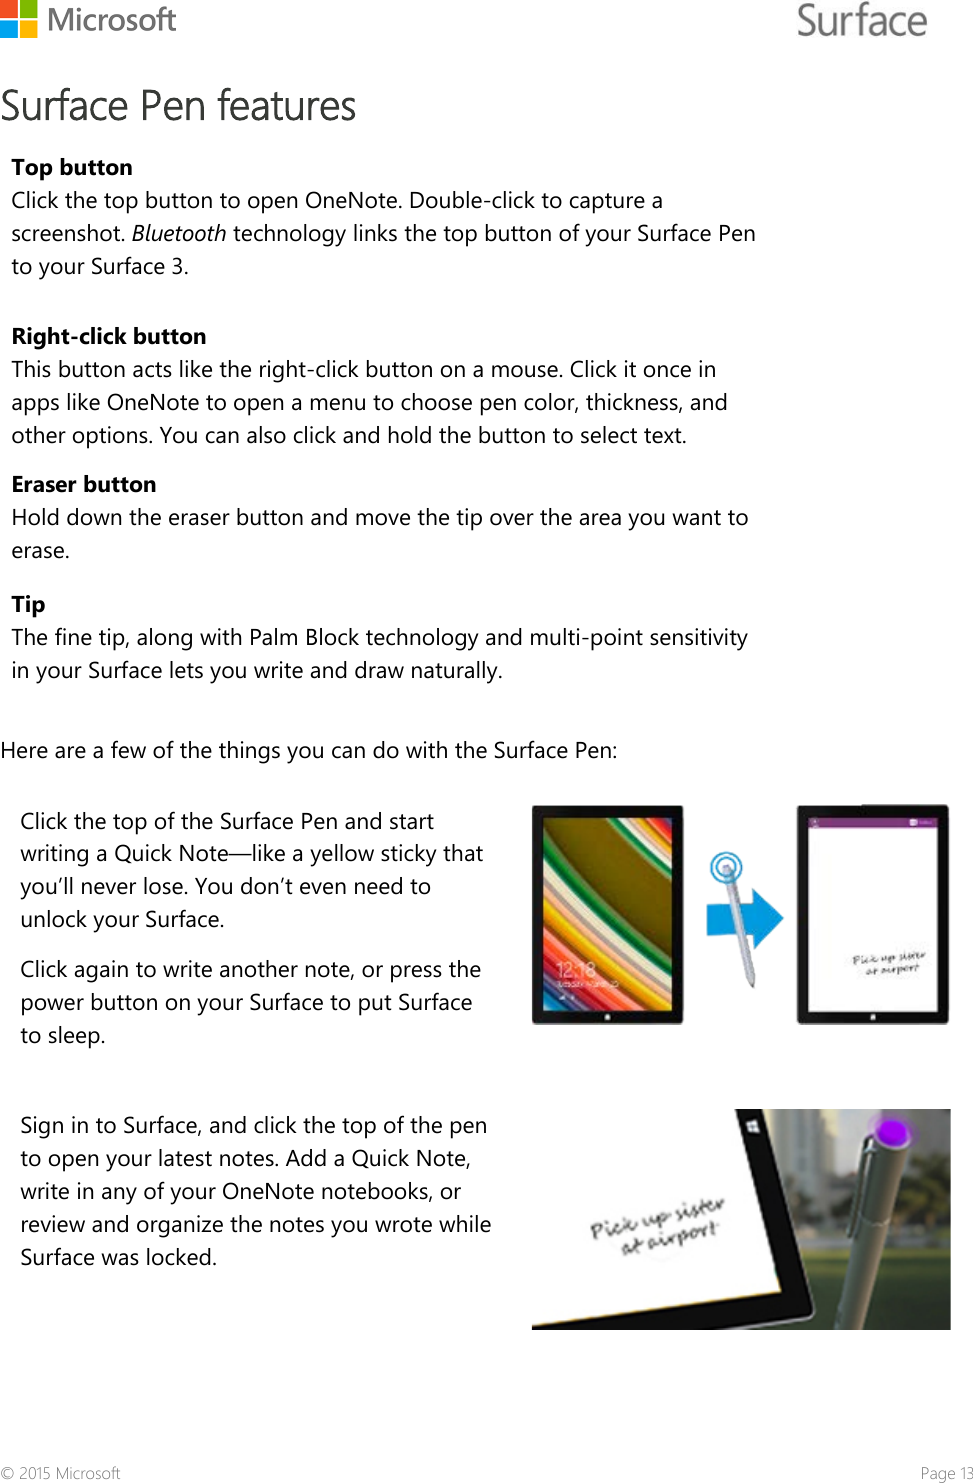    Surface Pen features Top button Click the top button to open OneNote. Double-click to capture a screenshot. Bluetooth technology links the top button of your Surface Pen to your Surface 3.  Right-click button This button acts like the right-click button on a mouse. Click it once in apps like OneNote to open a menu to choose pen color, thickness, and other options. You can also click and hold the button to select text. Eraser button Hold down the eraser button and move the tip over the area you want to erase. Tip The fine tip, along with Palm Block technology and multi-point sensitivity in your Surface lets you write and draw naturally.   Here are a few of the things you can do with the Surface Pen:  Click the top of the Surface Pen and start writing a Quick Note—like a yellow sticky that you’ll never lose. You don’t even need to unlock your Surface.  Click again to write another note, or press the power button on your Surface to put Surface to sleep.  Sign in to Surface, and click the top of the pen to open your latest notes. Add a Quick Note, write in any of your OneNote notebooks, or review and organize the notes you wrote while Surface was locked.  © 2015 Microsoft    Page 13 